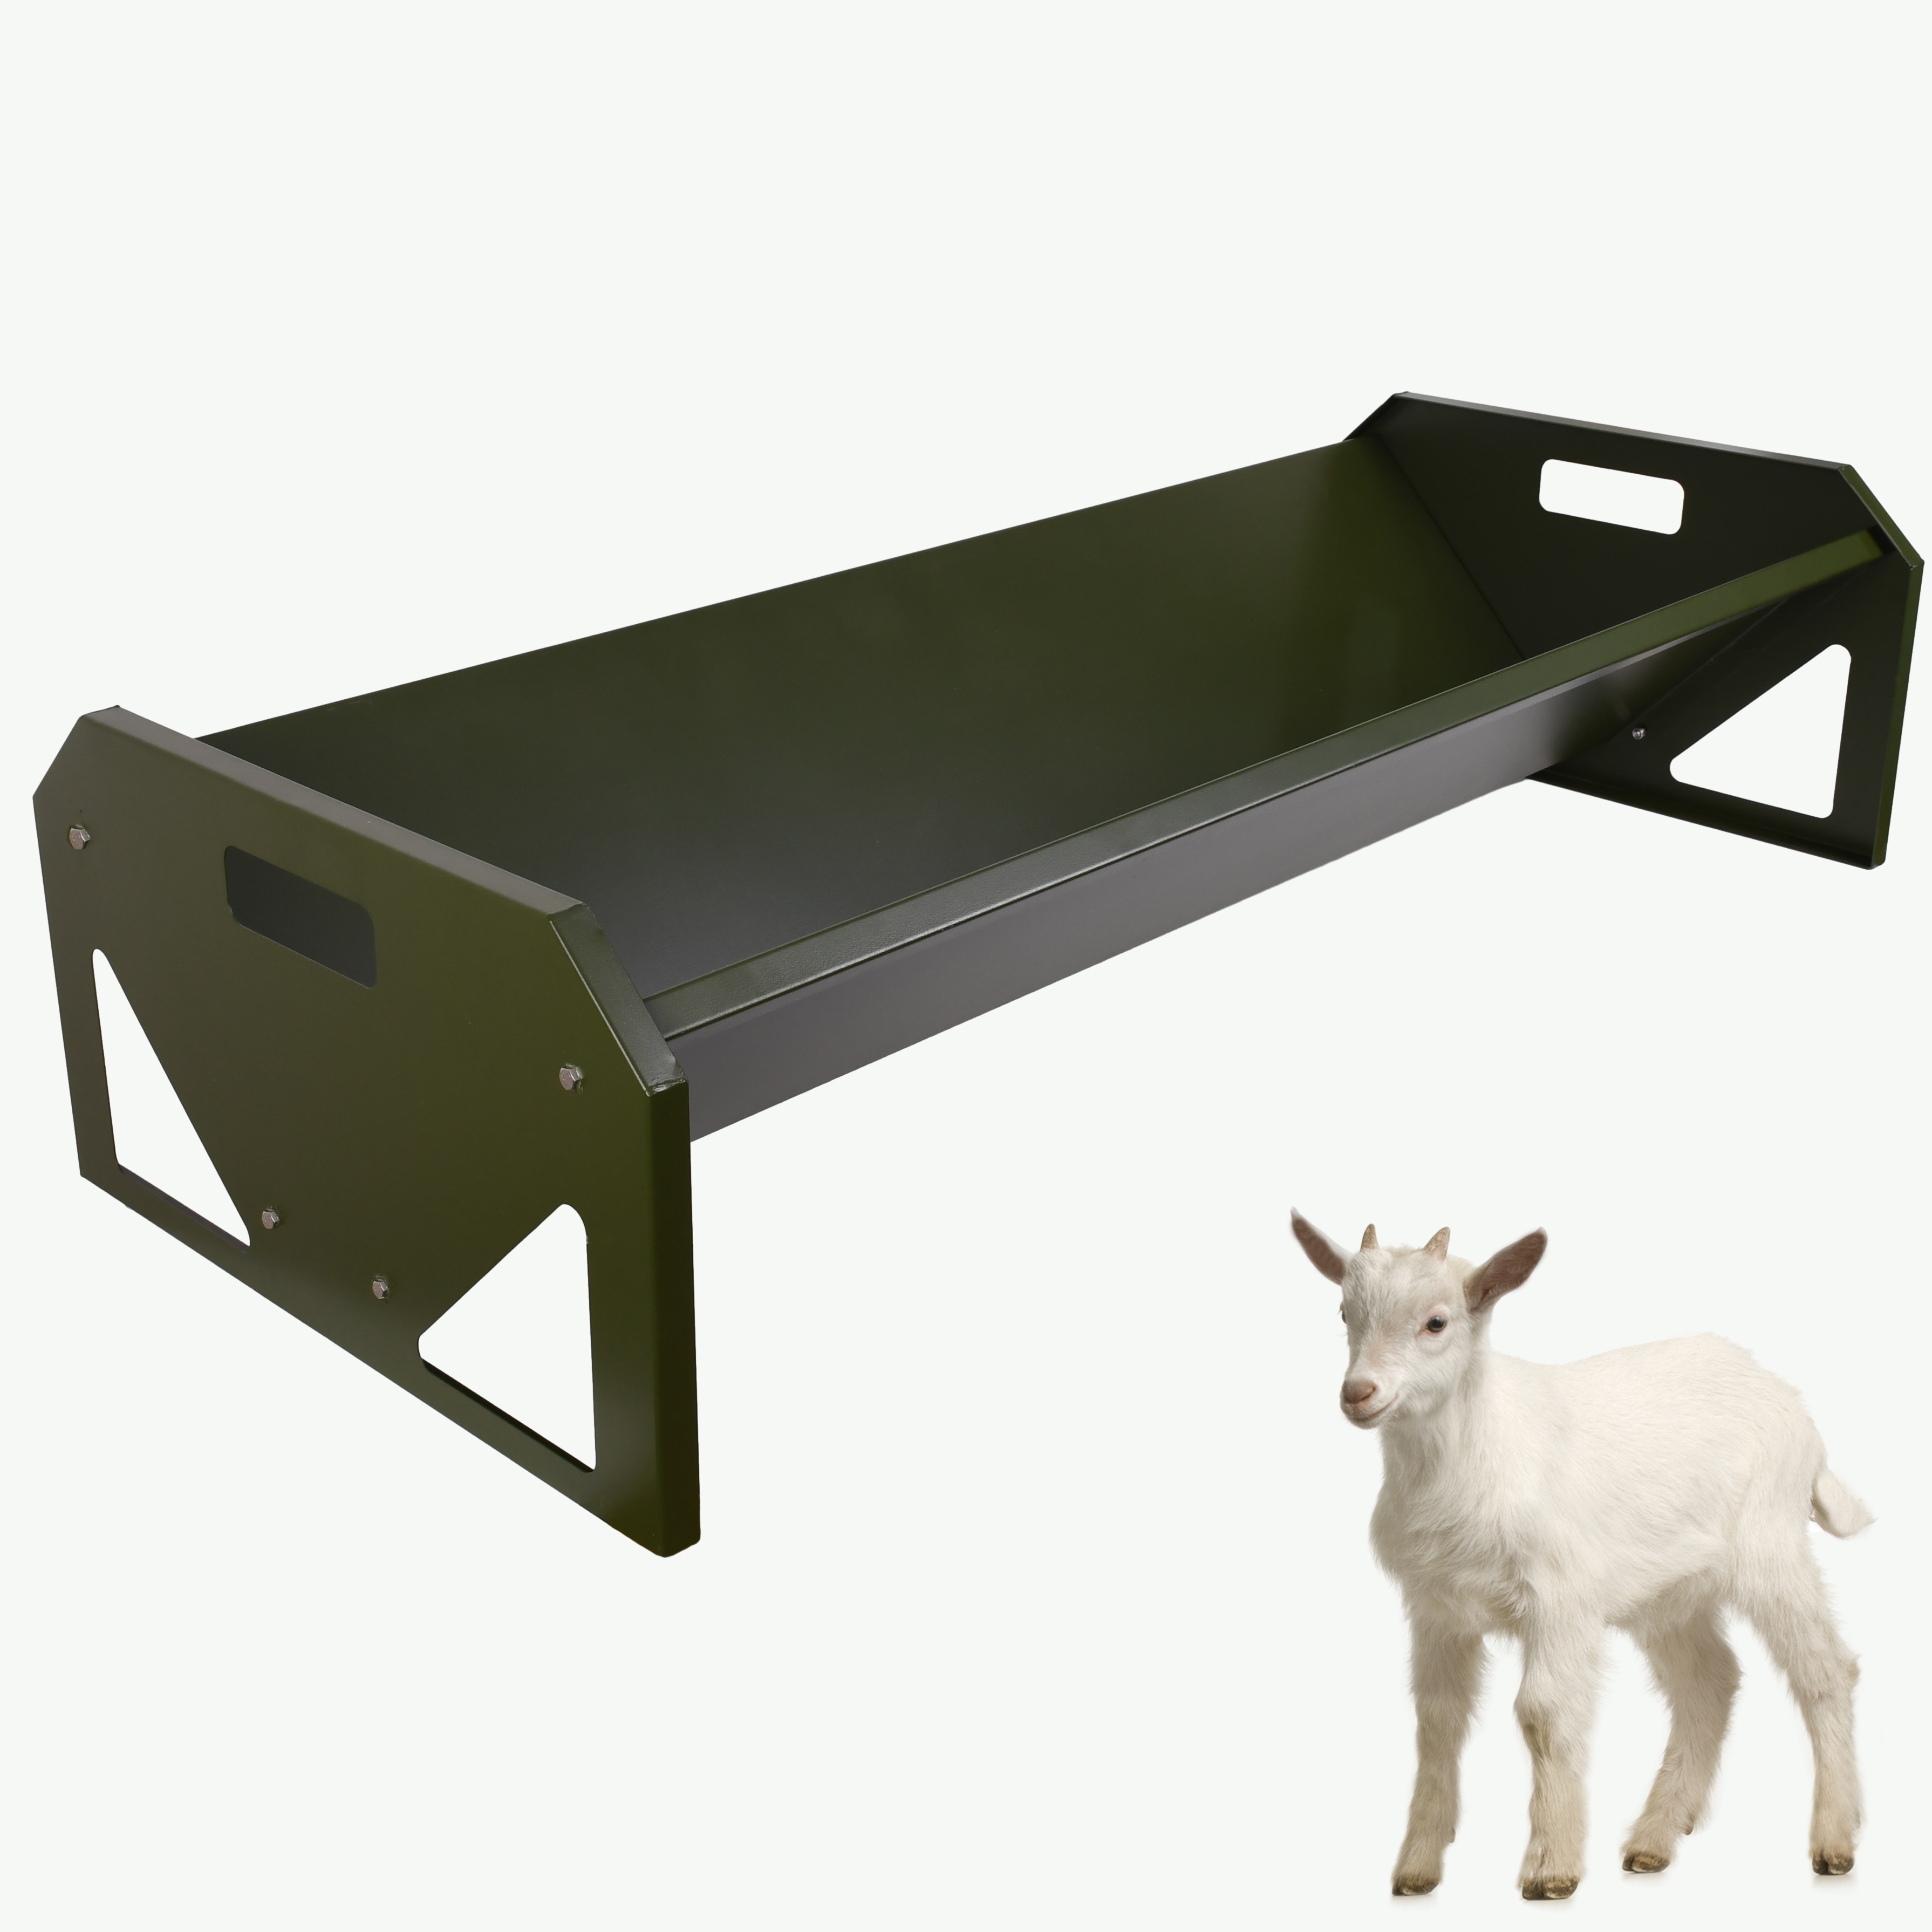 

Portable 45" Long Galvanized Steel Livestock Feeding Trough, Heavy-duty Large Capacity Feeder, Easy To Clean, For Calves, Sheep, Horses, Alpacas And Goats, green